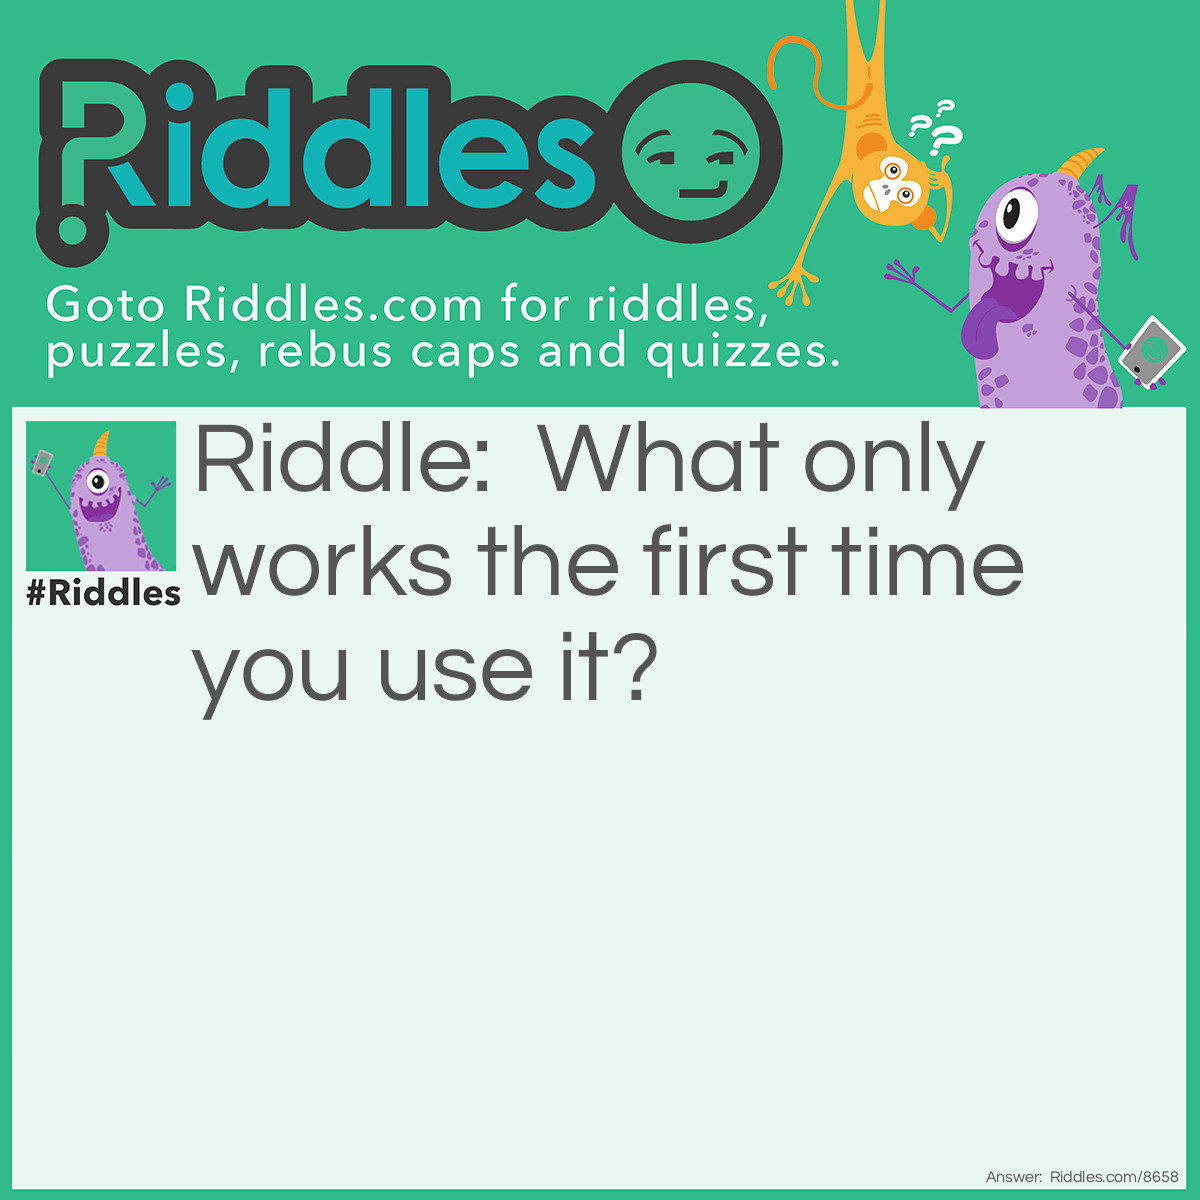 Riddle: What only works the first time you use it? Answer: A match.